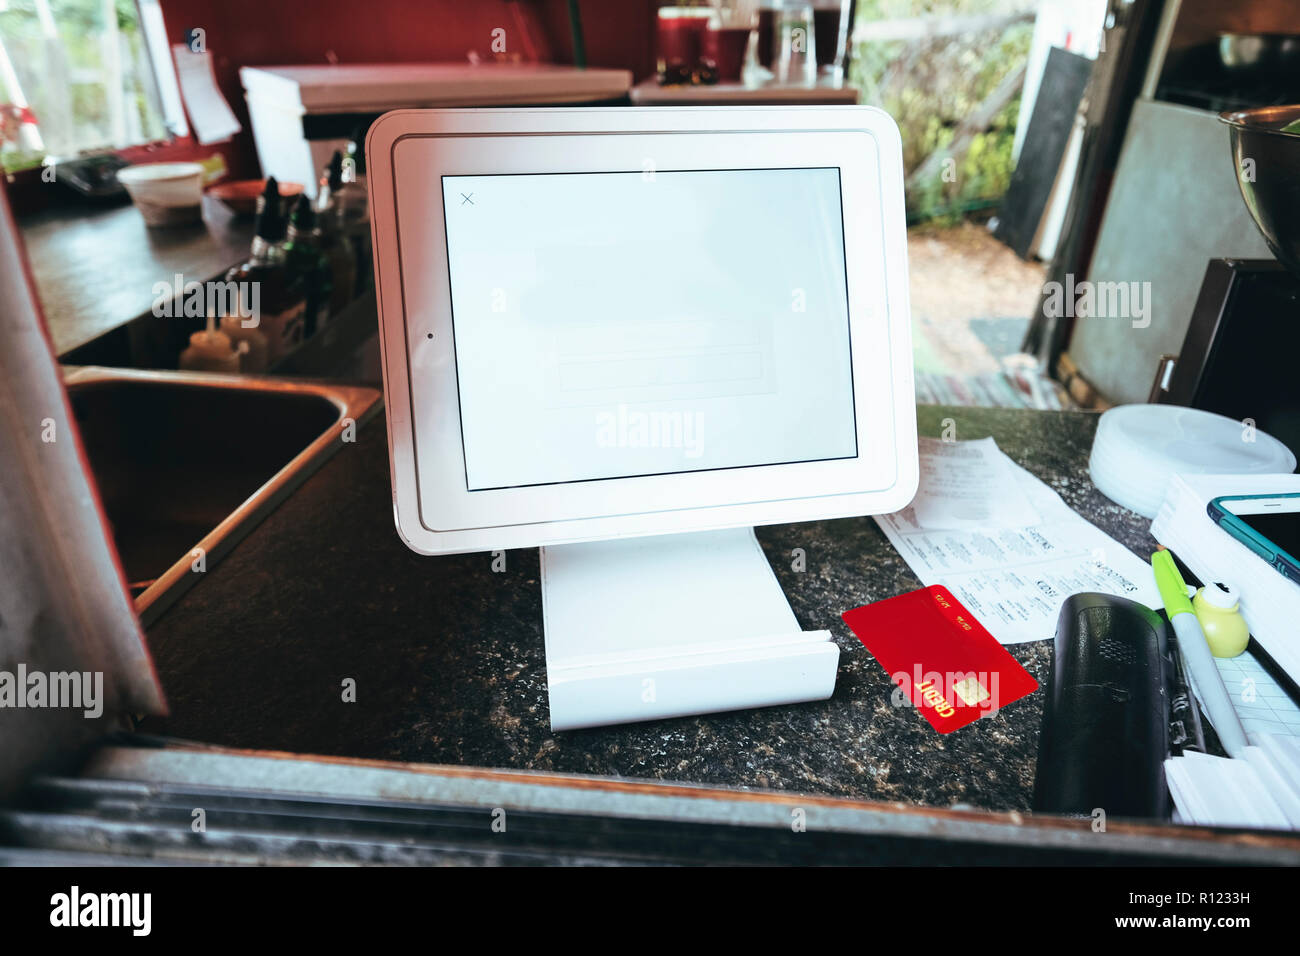 Digital screen for food orders and payment at eatery Stock Photo